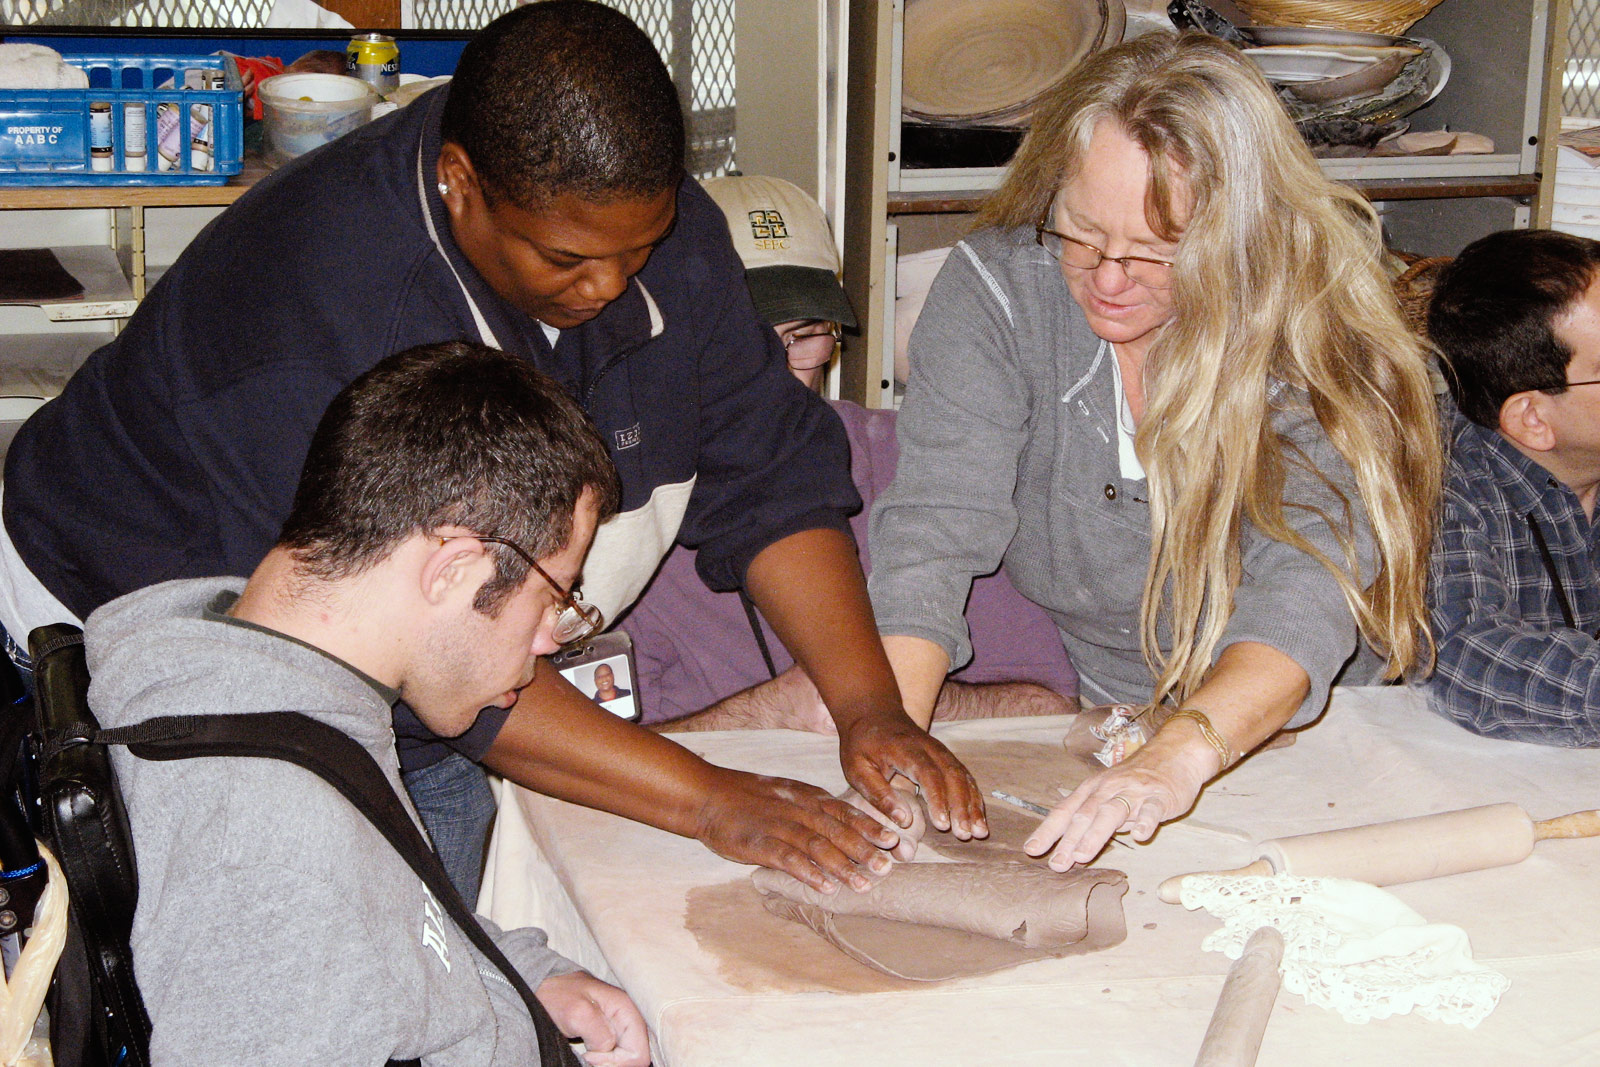 participant and aides rolling dough